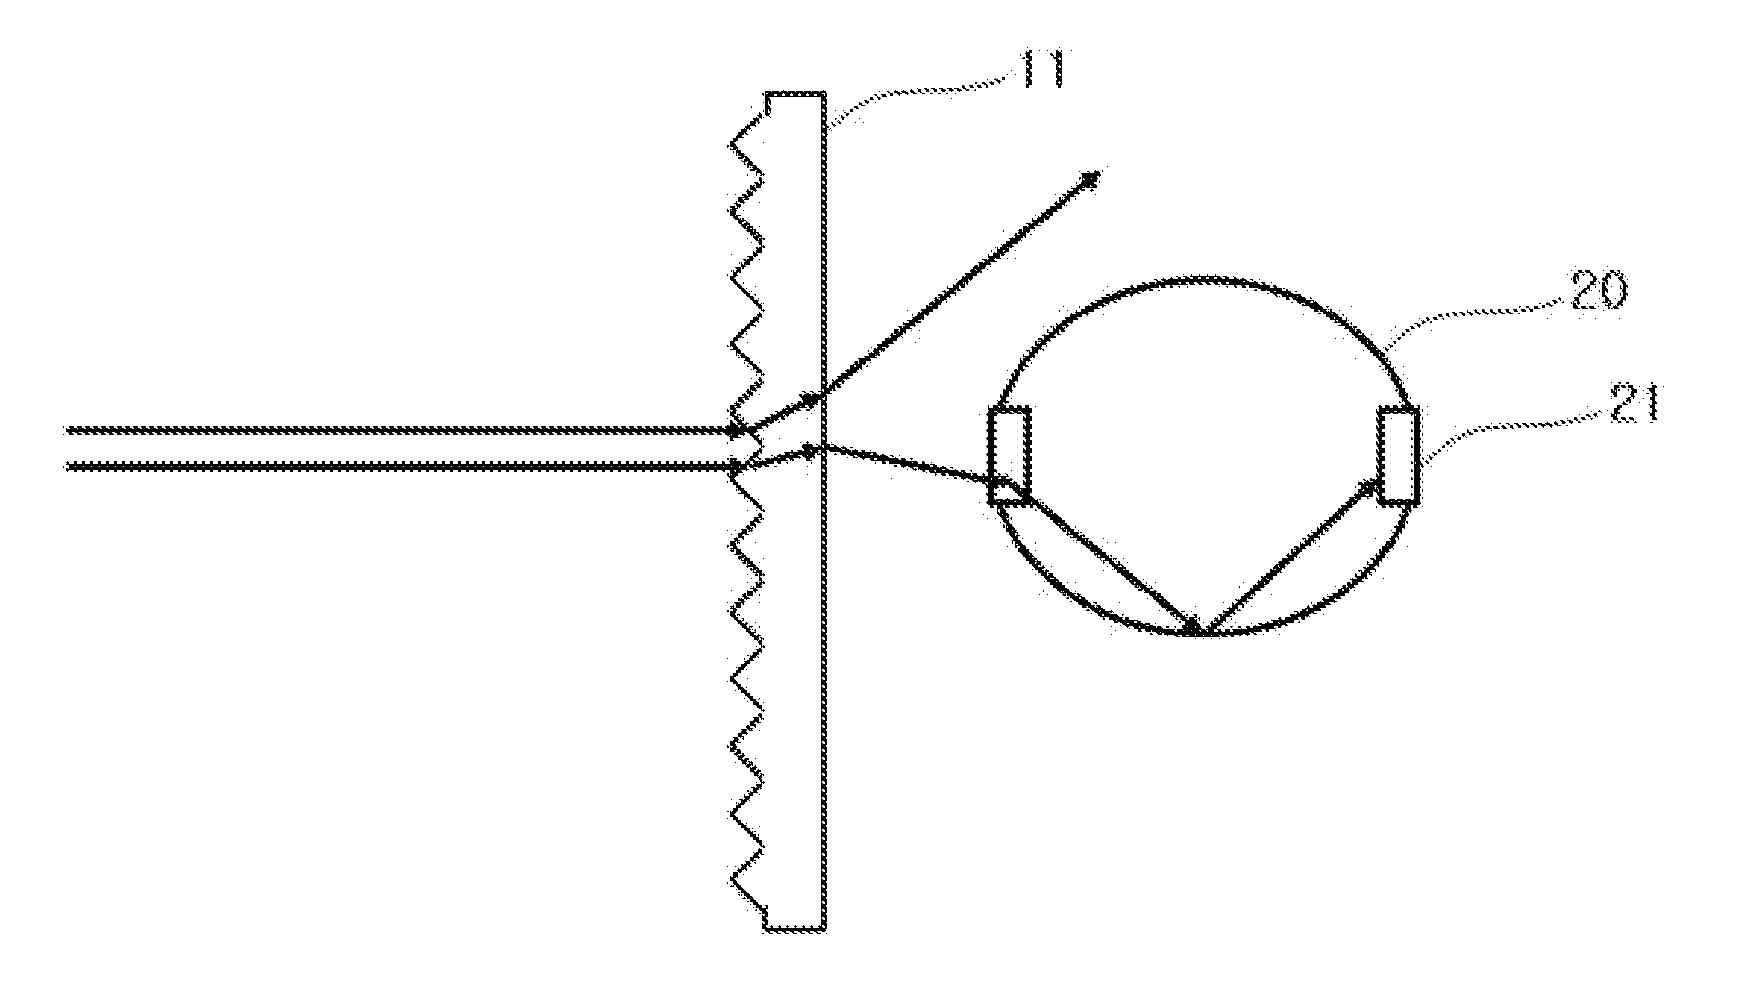 Apparatus for measuring transmissivity of patterned glass substrate